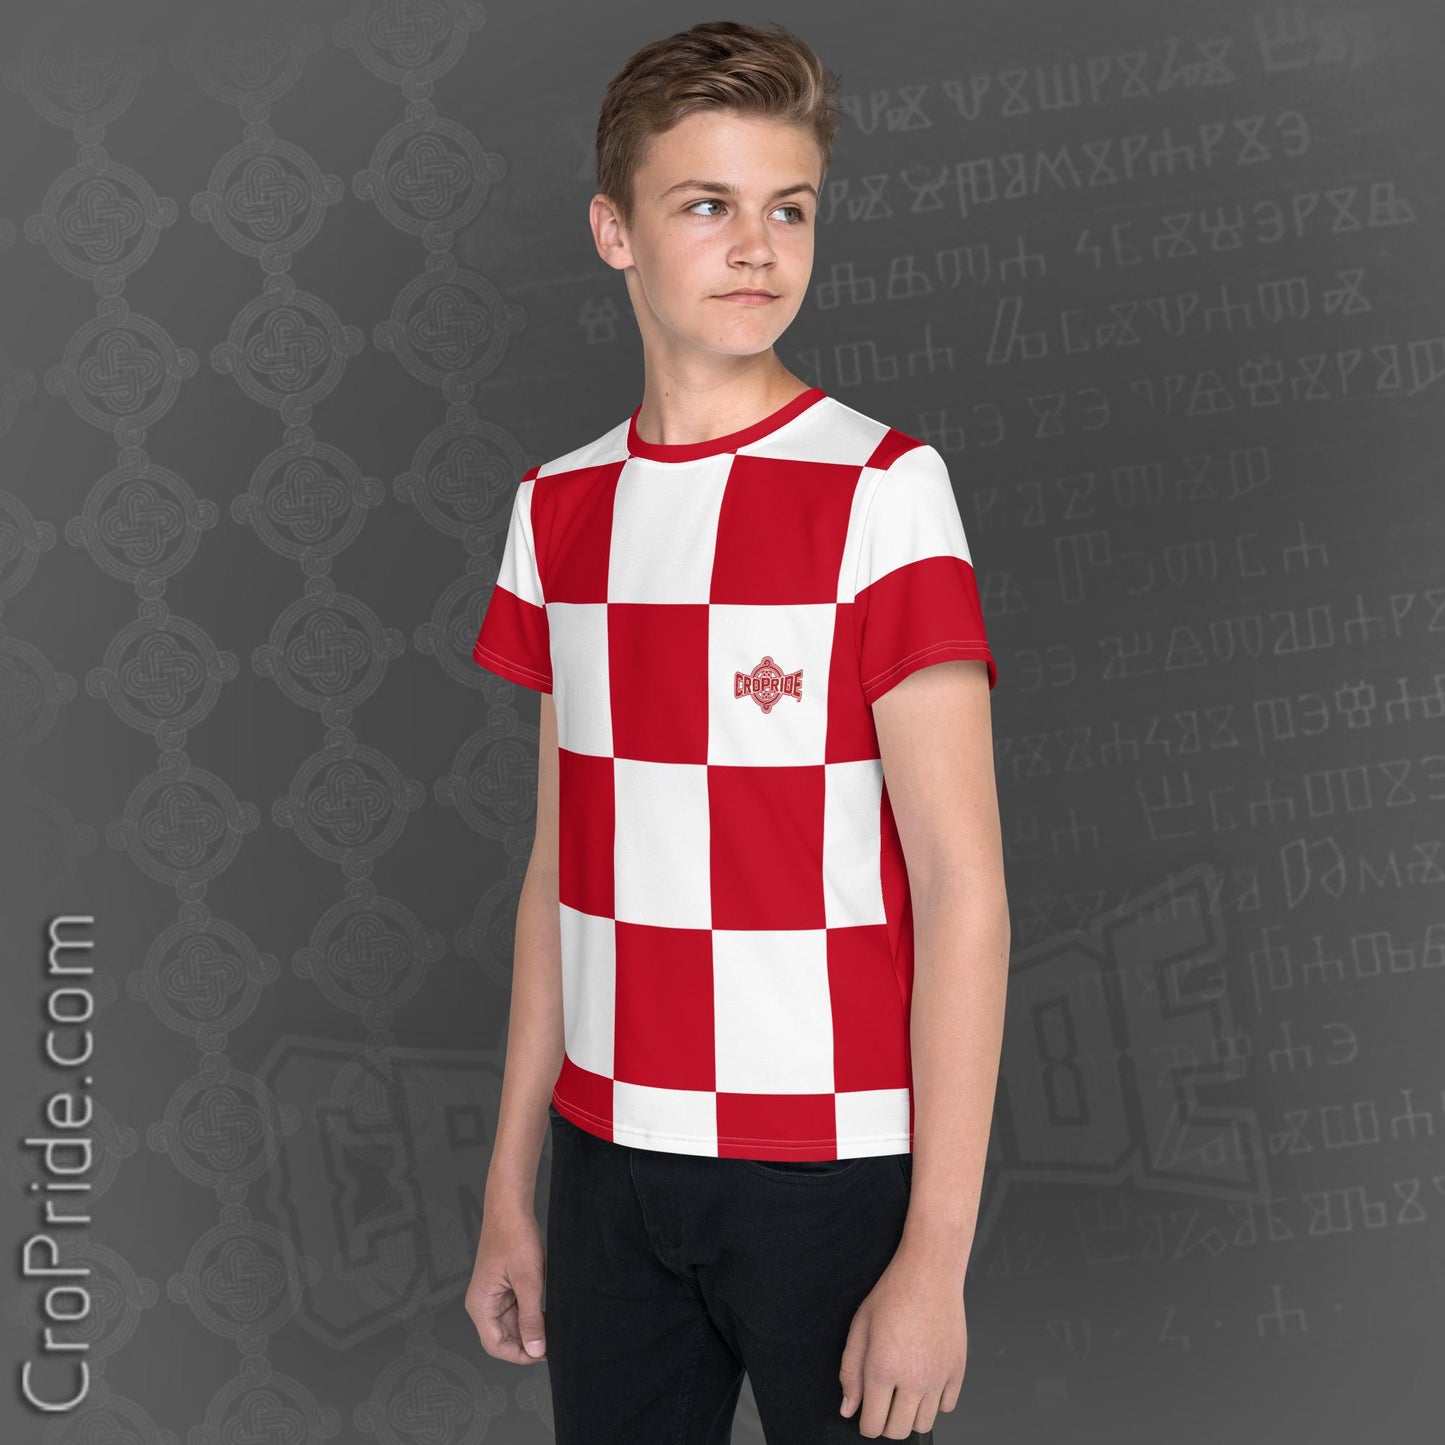 Croatian Checkers "Mi Hrvati" Youth Crew Neck T-Shirt - 95% Polyester | 4-Way Stretch Fabric